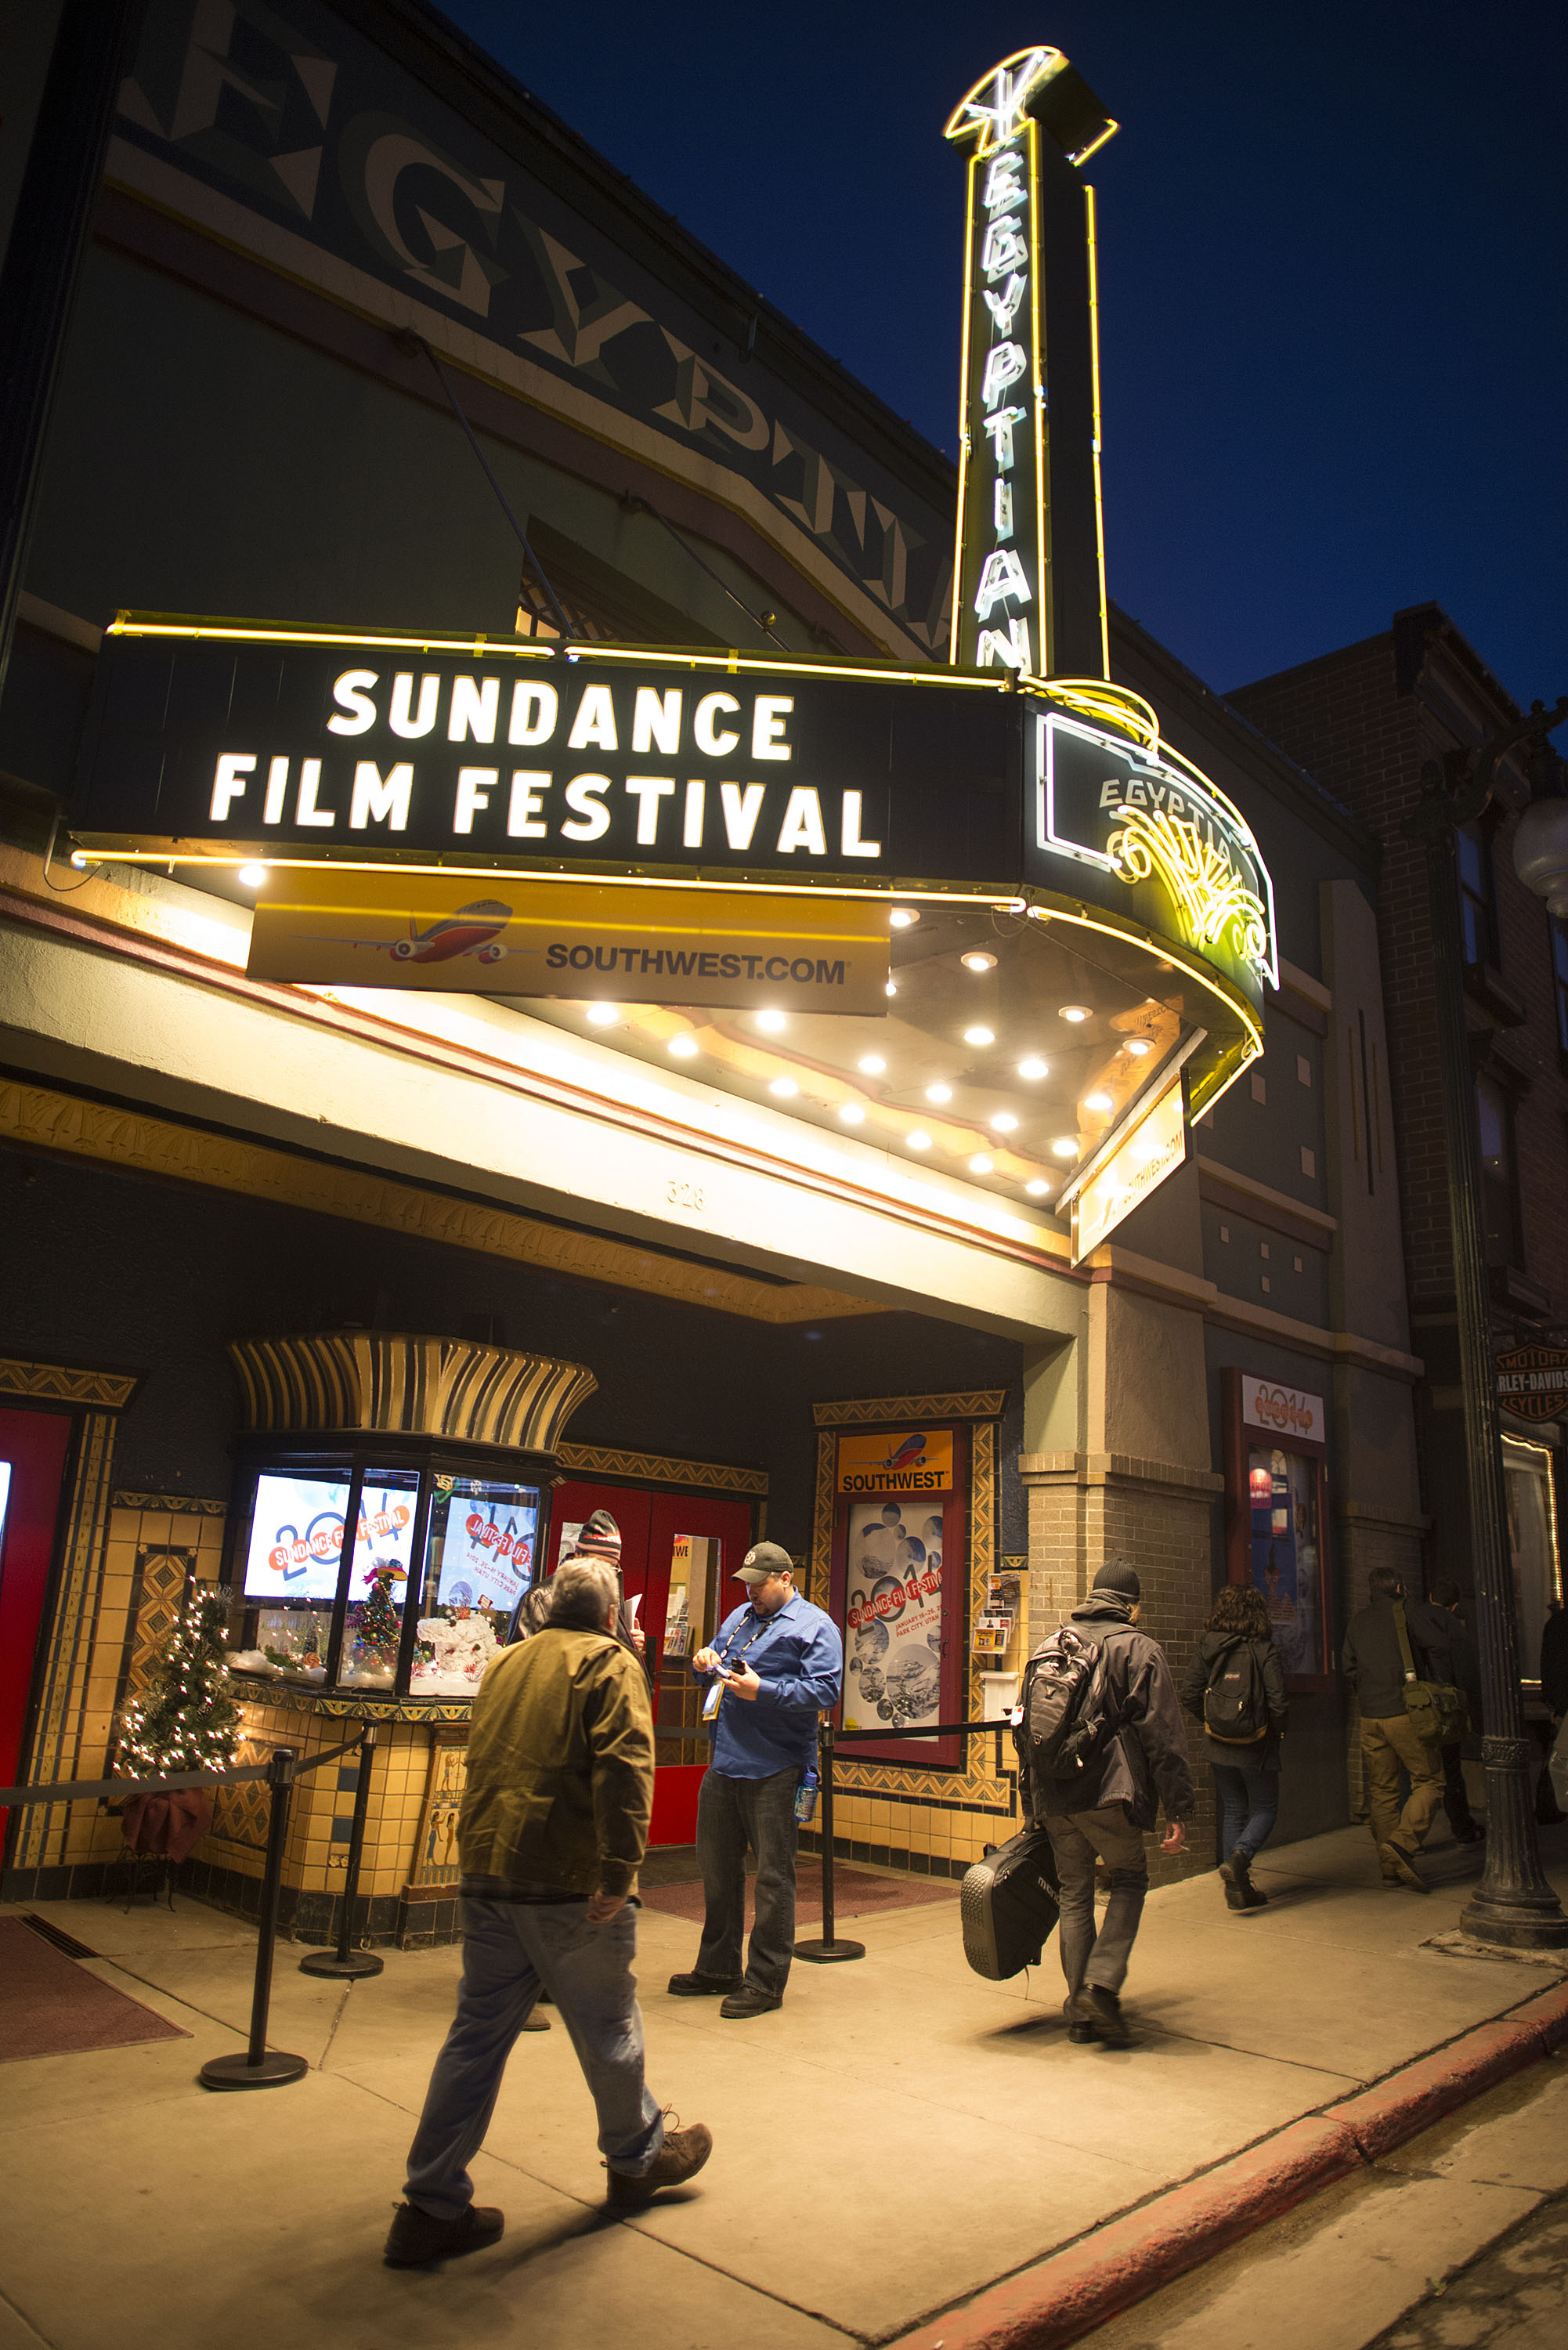 The Egyptian Theatre on Main Street in Park City lights up during the Sundance Film Festival. The 2017 Sundance Film Festival runs Jan. 19-29. (Associated Press)